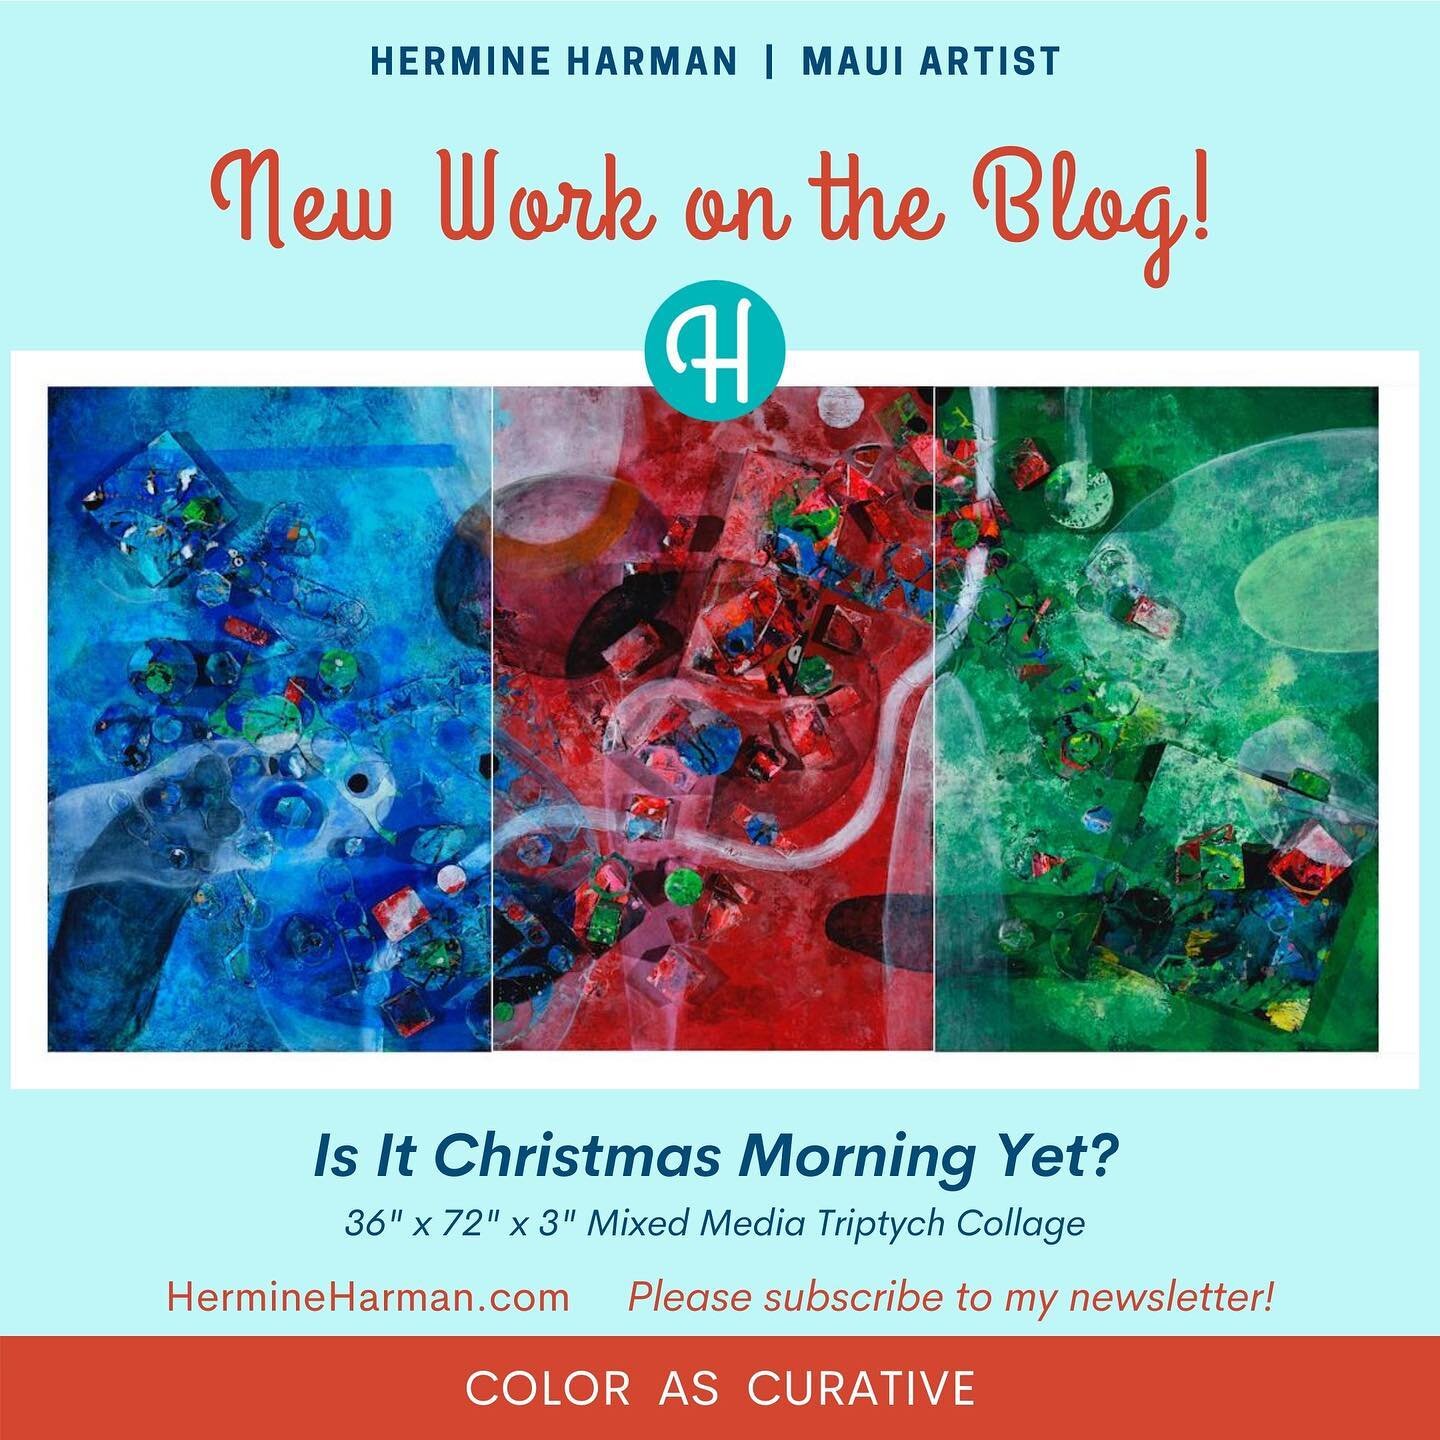 My latest blog just posted!  Check it out and I would love for you to sign up for my website @hermineHarman.com

#AbstractArt #HermineHarmandotcom #ArtForSale #Maui #MauiArtist #Color #Art2Life #Art2LifeAcademy #EnchantressGallerybyBootzie #GottlingG